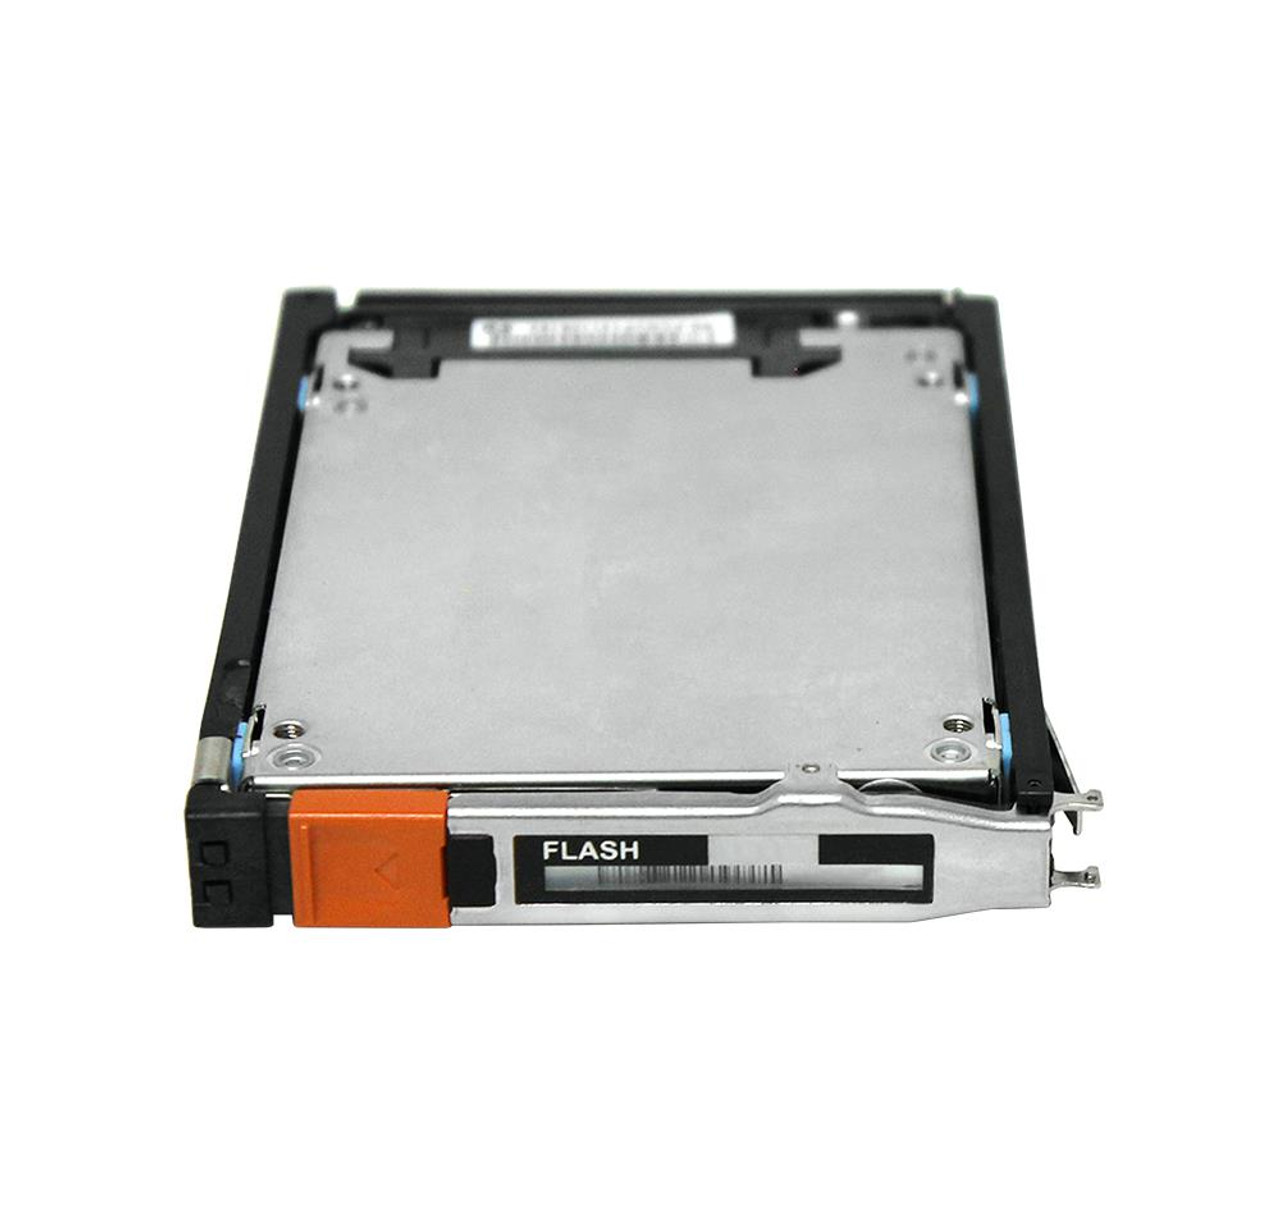 5052113 EMC 7.68TB SAS 12Gbps 2.5-inch Internal Solid State Drive (SSD)